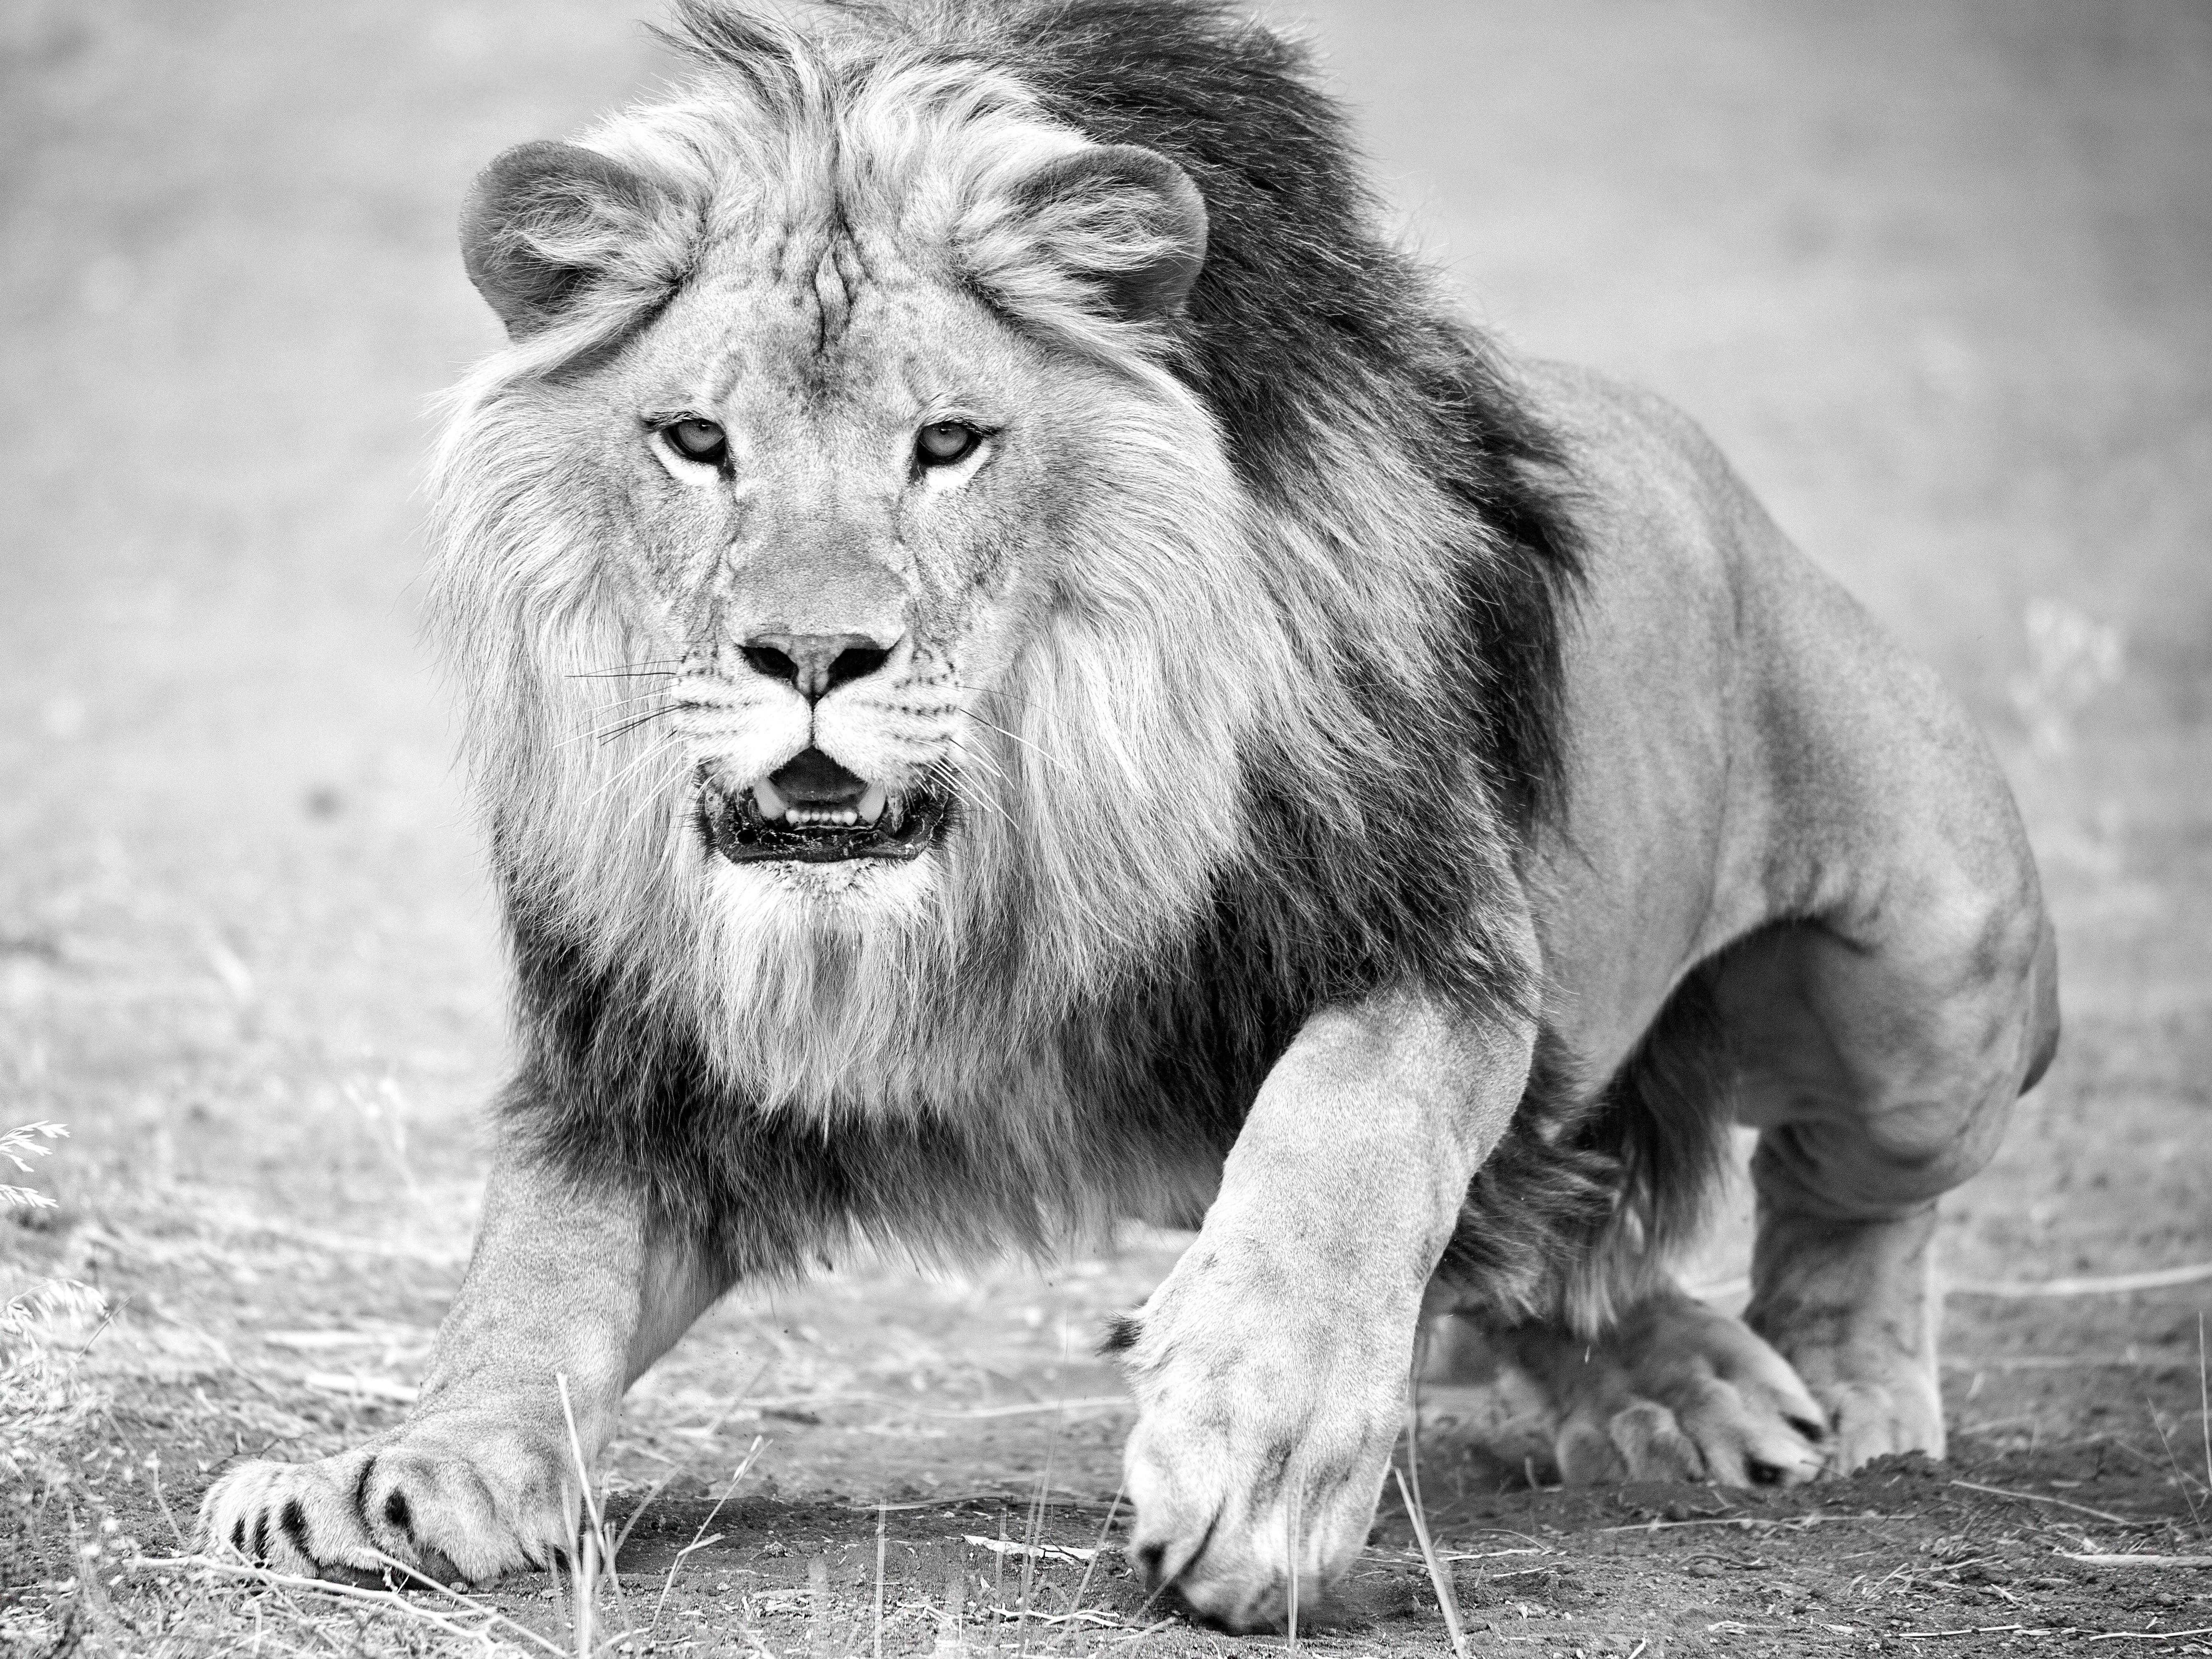 Shane Russeck Animal Print - "The Charge" 30x25 - Black & White Photography, Lion Photograph, Unsigned Print